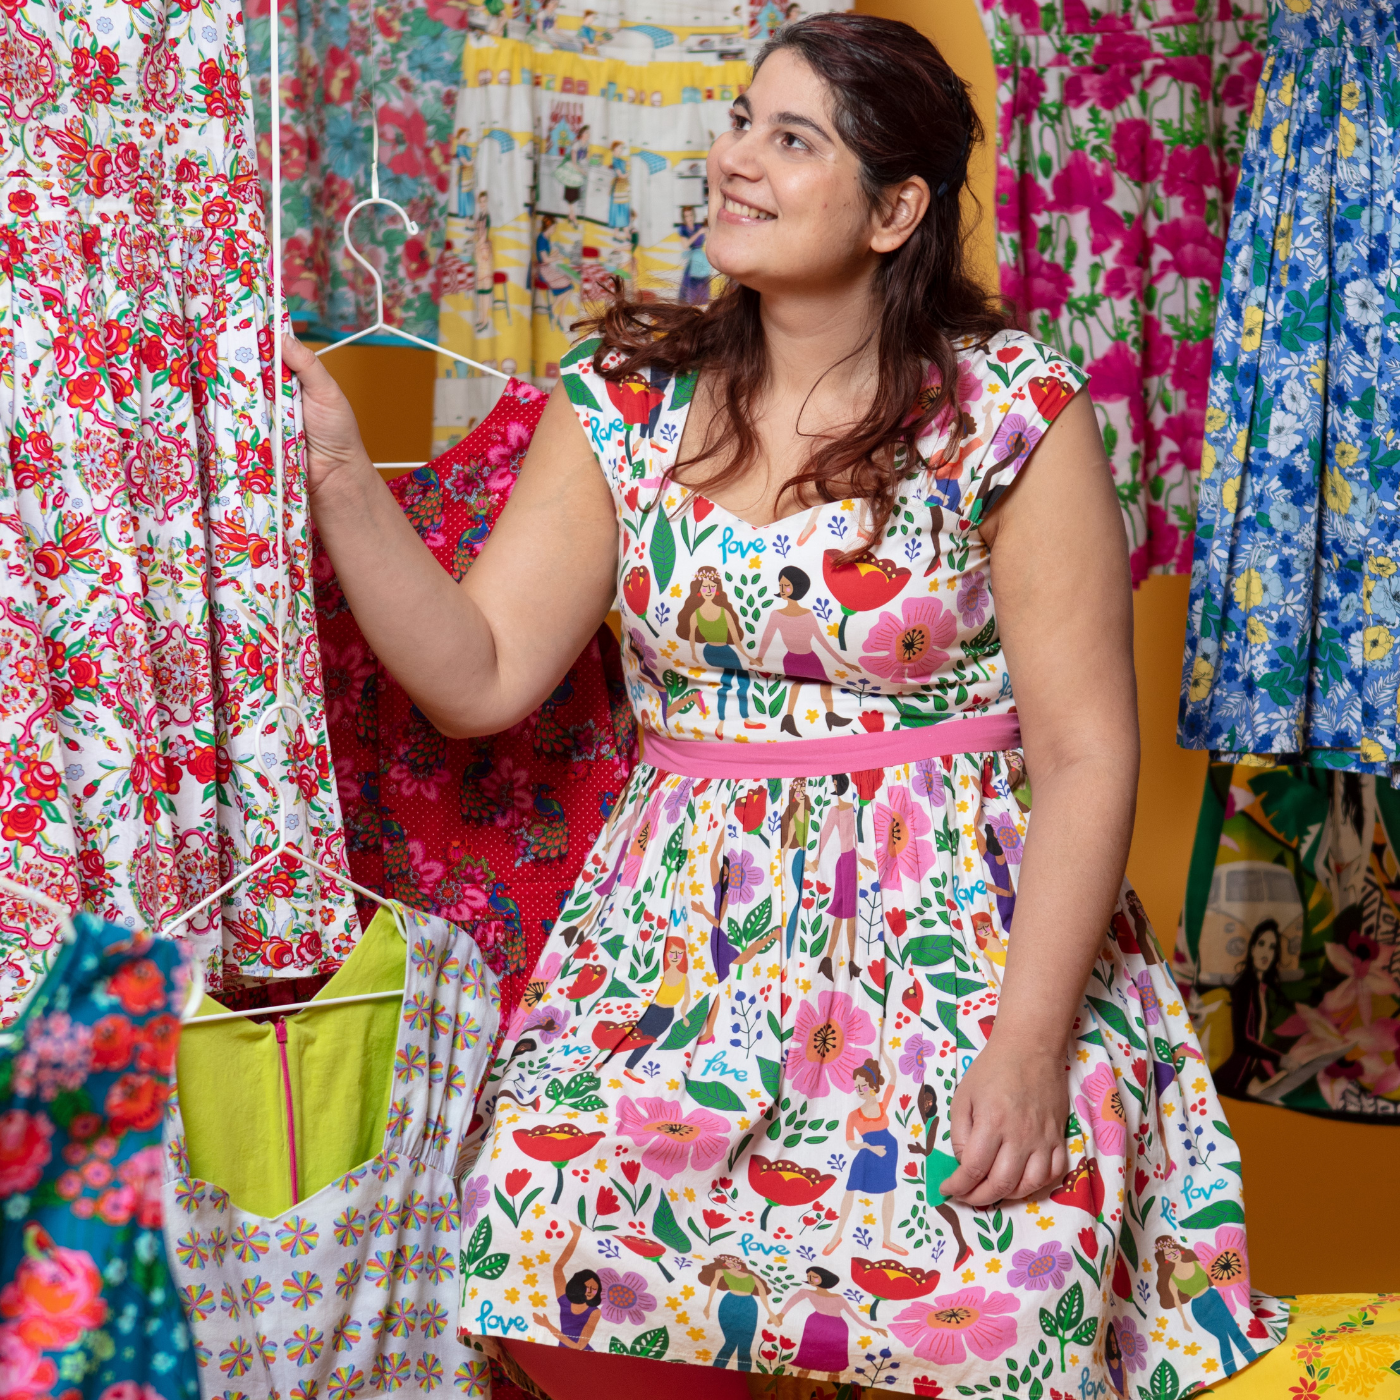 Sangeeta sits surrounded by colorful dresses and wears a dress with women holding hands, doing yoga and walking through large pink, red and purple flowers. She is looking up and away from the camera and smiling with her right hand on a white-and-red floral print dress.